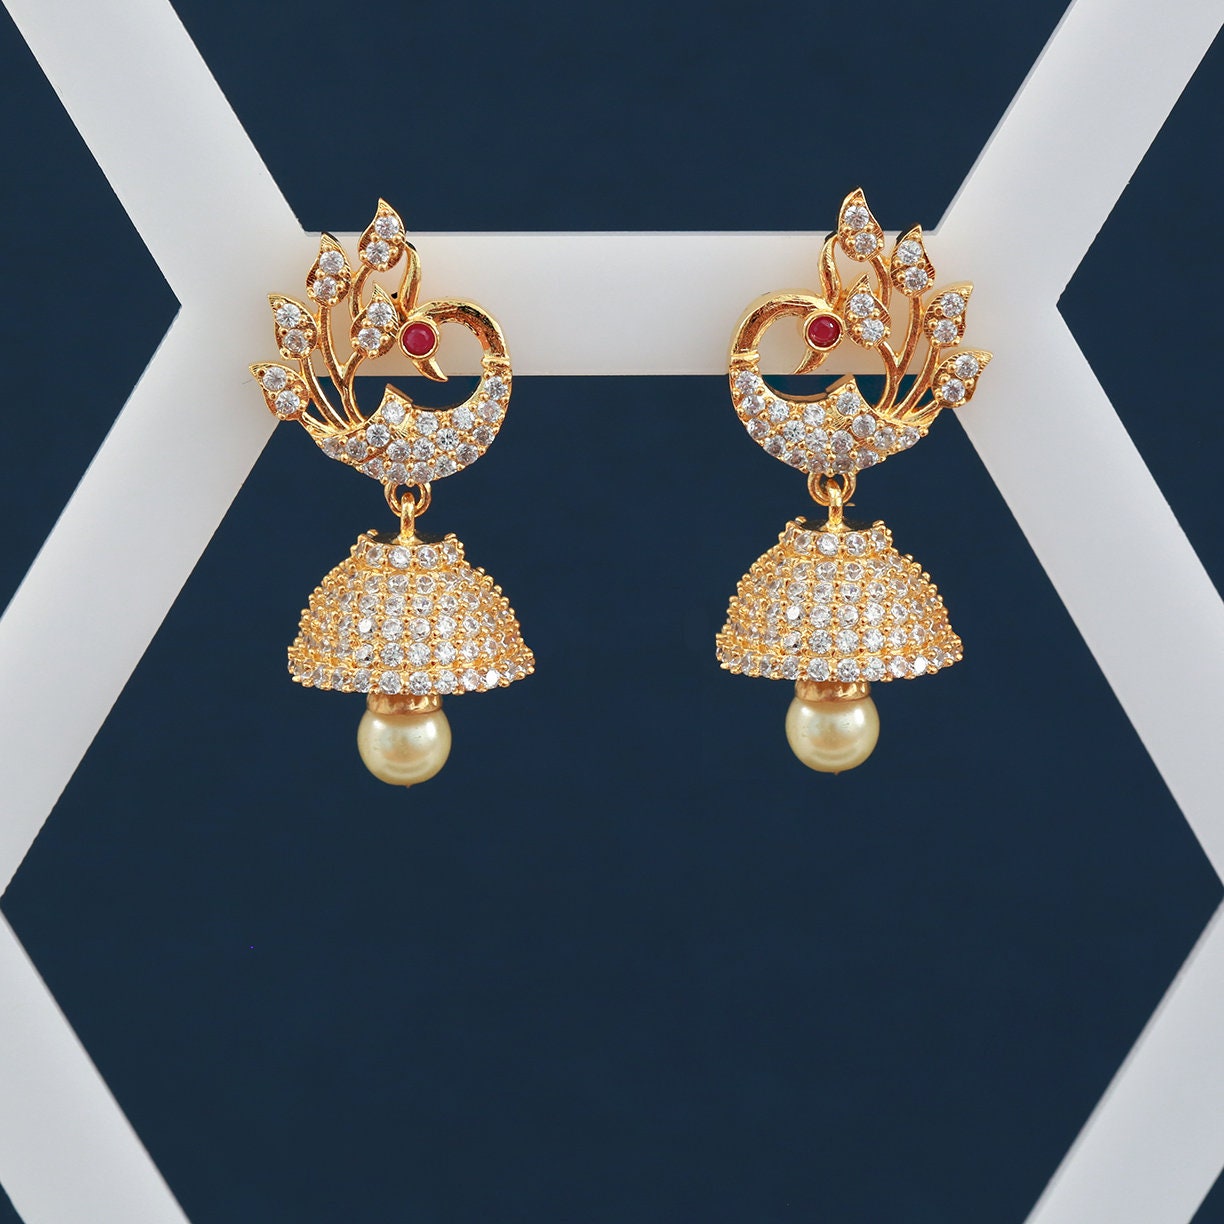 21 Best Wedding Earring Designs For Brides! • South India Jewels | Designer  earrings, Gold earrings designs, Fashion jewelry